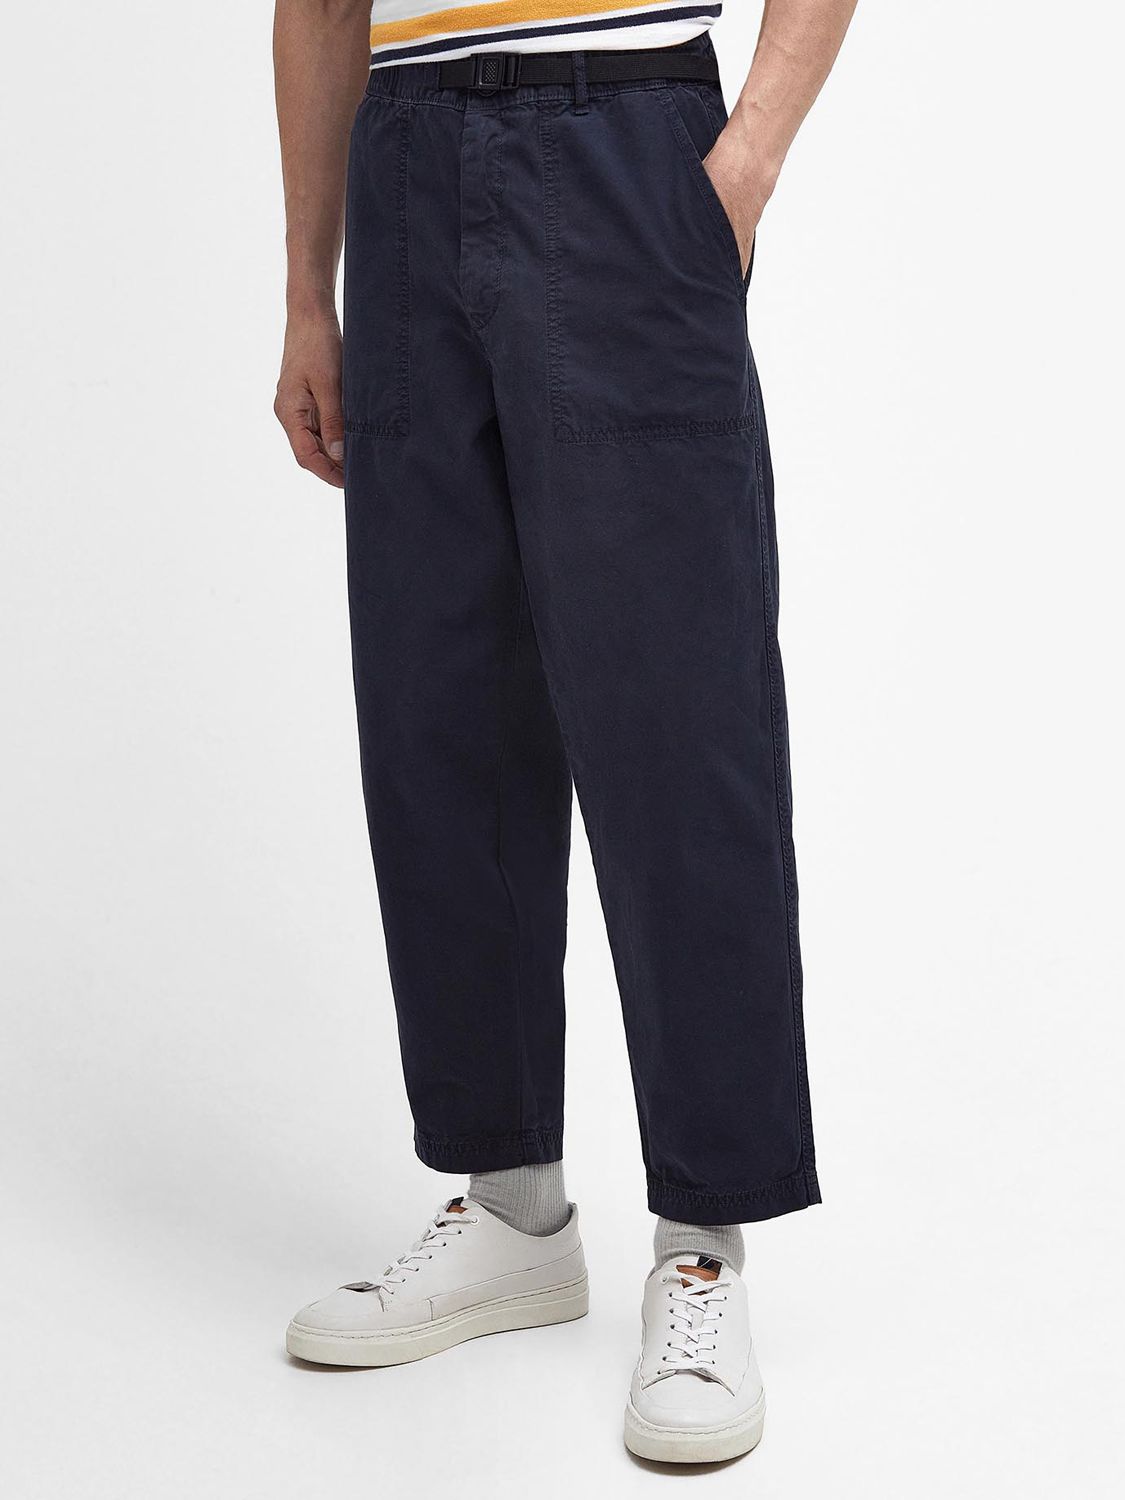 Barbour Grindle Cotton Canvas Twill Straight Leg Trousers, Navy at John ...